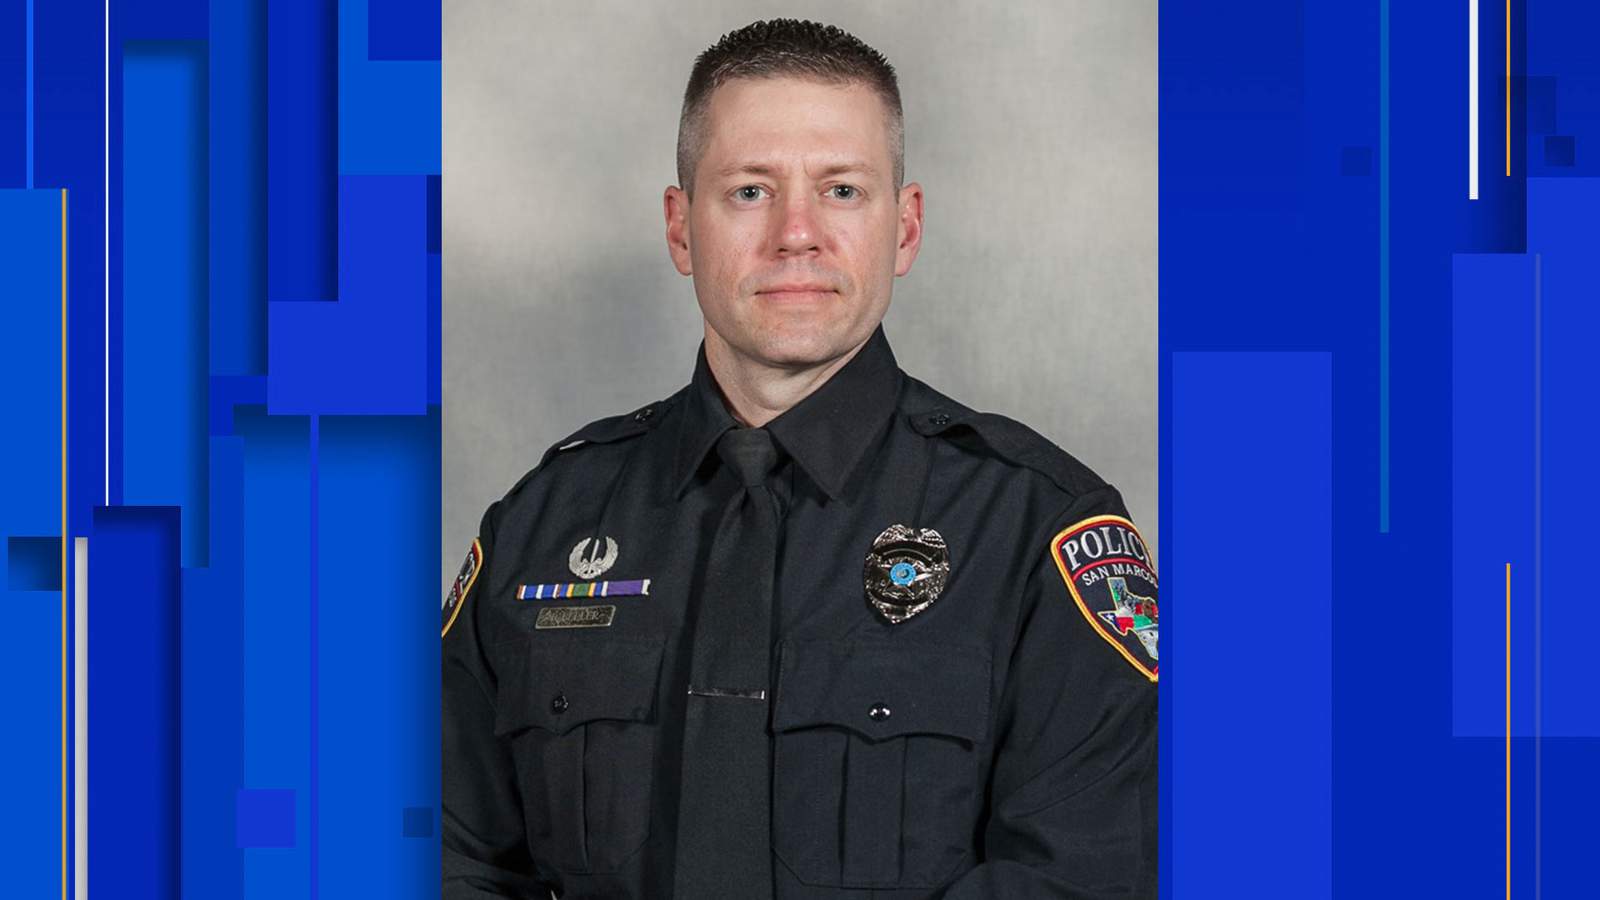 San Marcos police give update on officer struck by vehicle in March